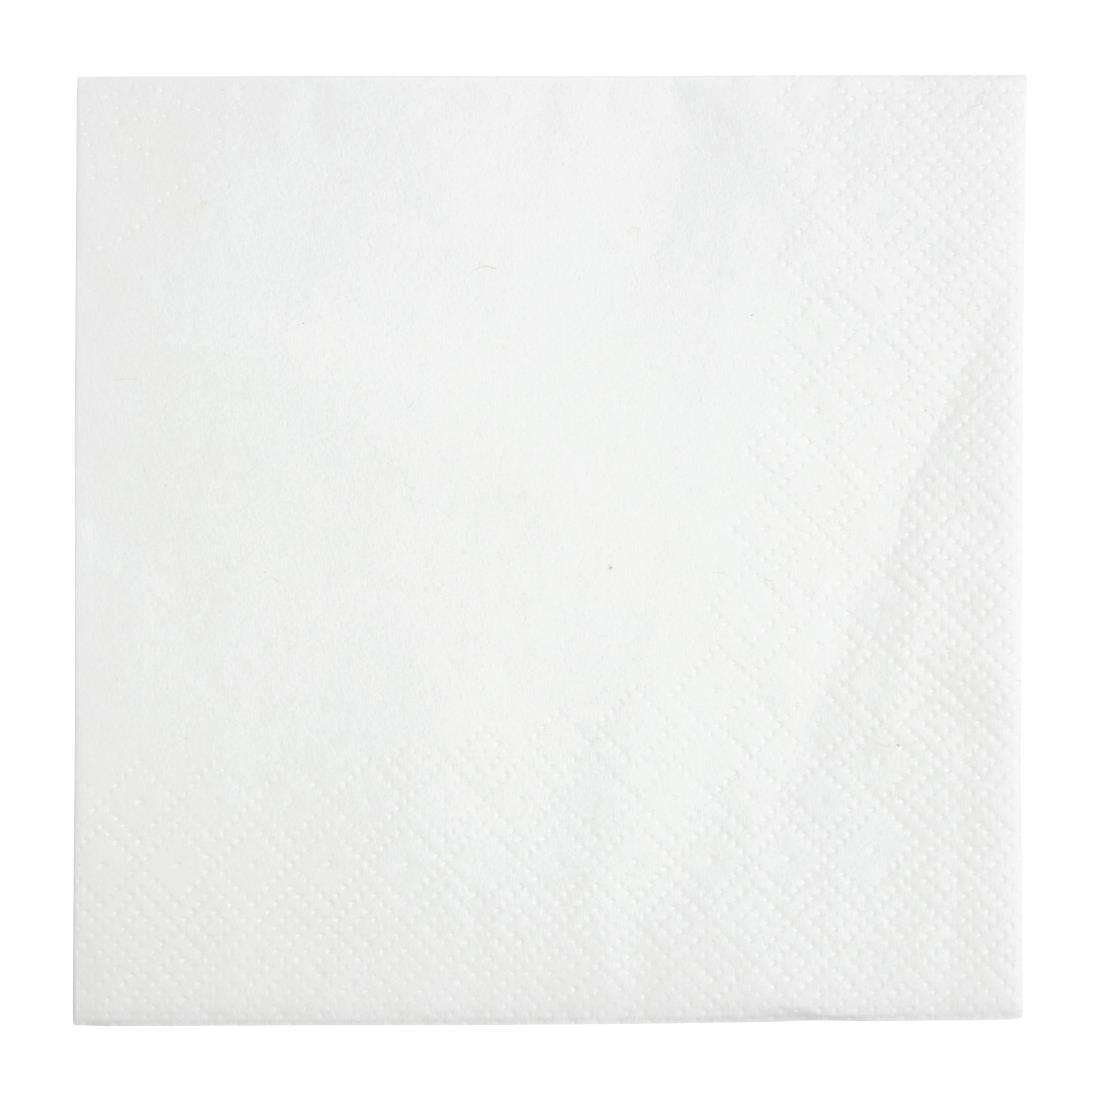 Fiesta Recyclable Cocktail Napkin White 24x24cm 2ply 1/4 Fold (Pack of 4000) - FE216  - 2